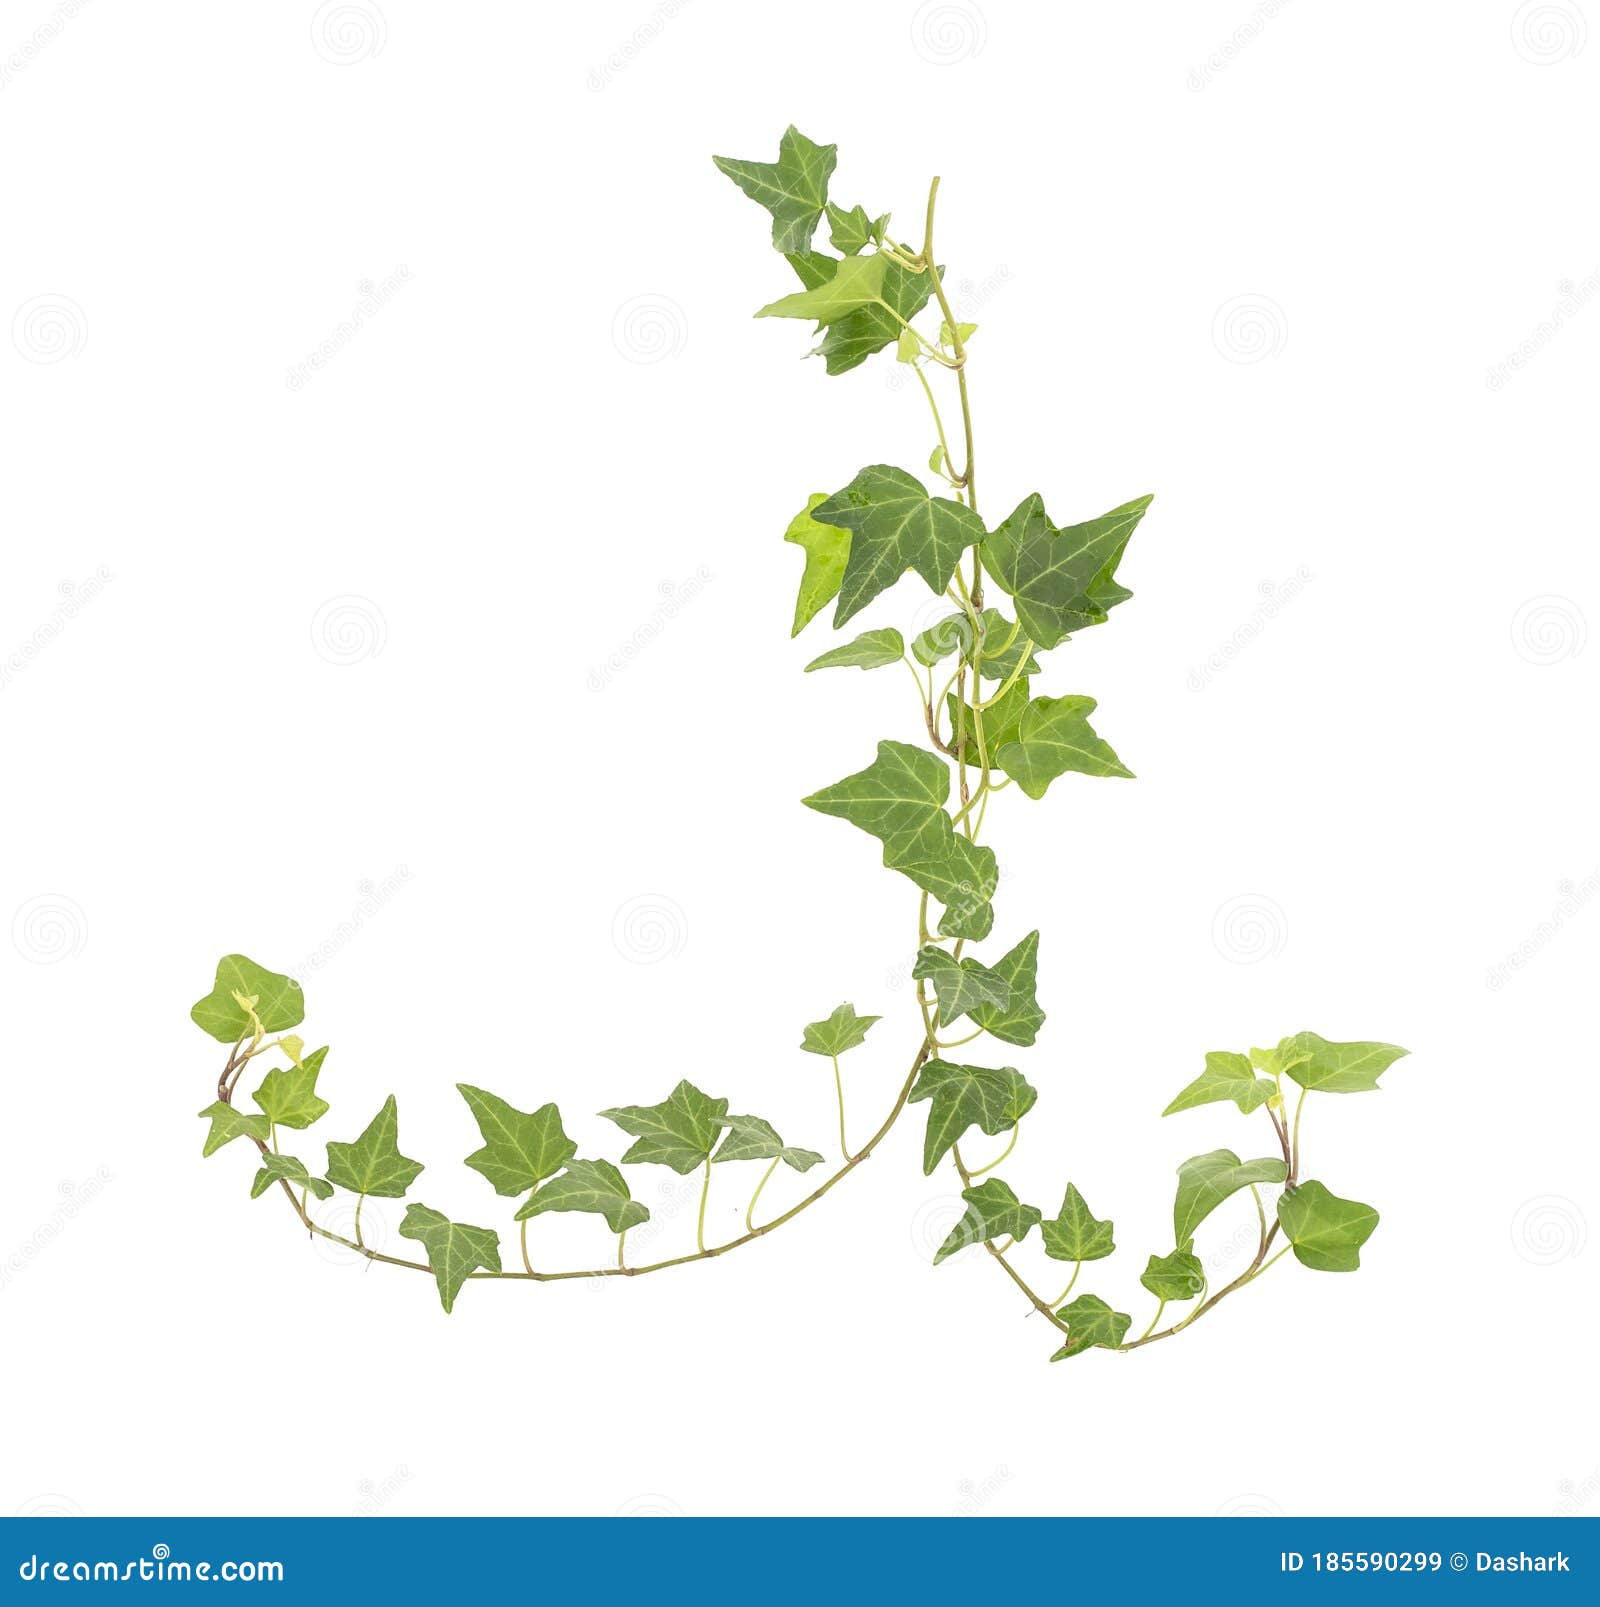 Ivy isolated on a white stock image. Image of frame - 185590299